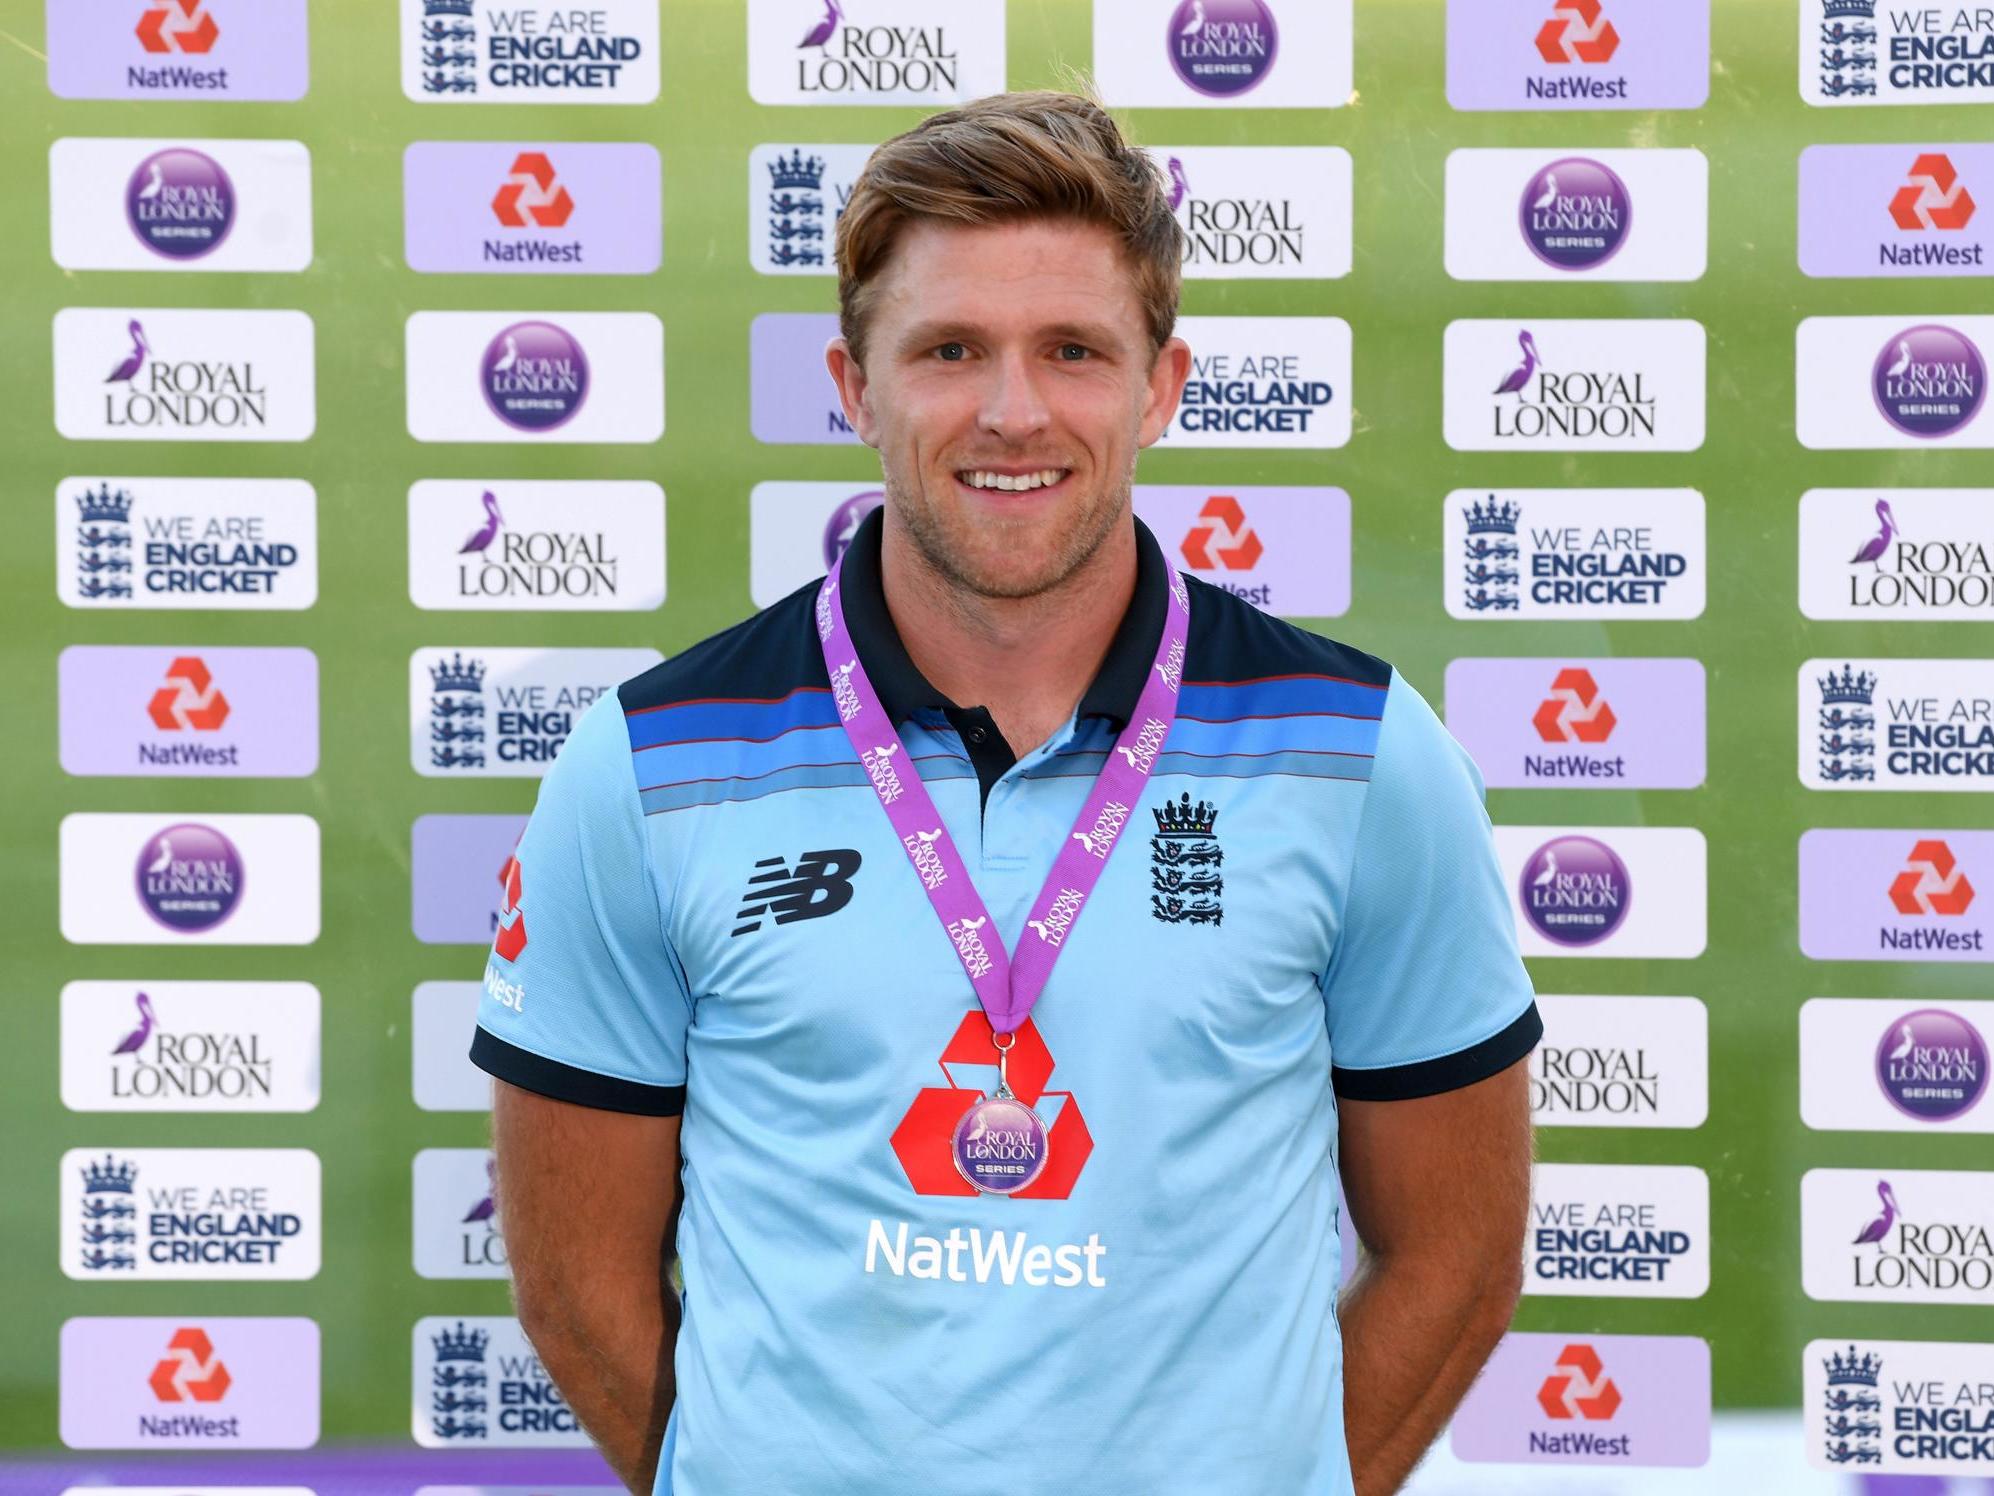 Willey took five wickets as England won the first ODI